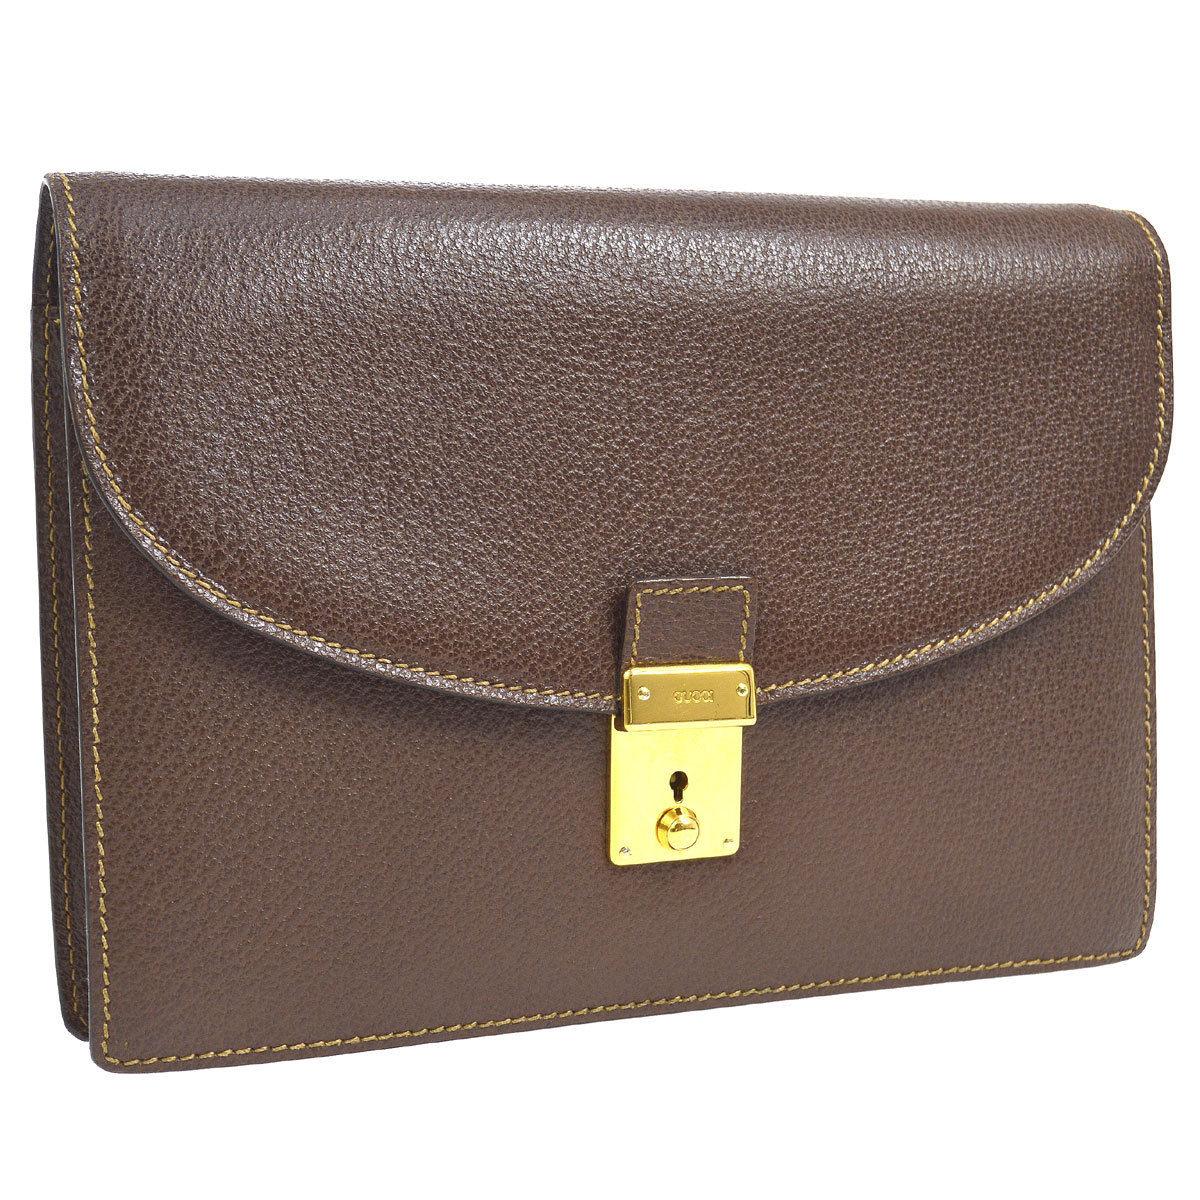 Gucci Chocolate Brown Leather Envelope Flip Lock Evening Clutch Flap Bag